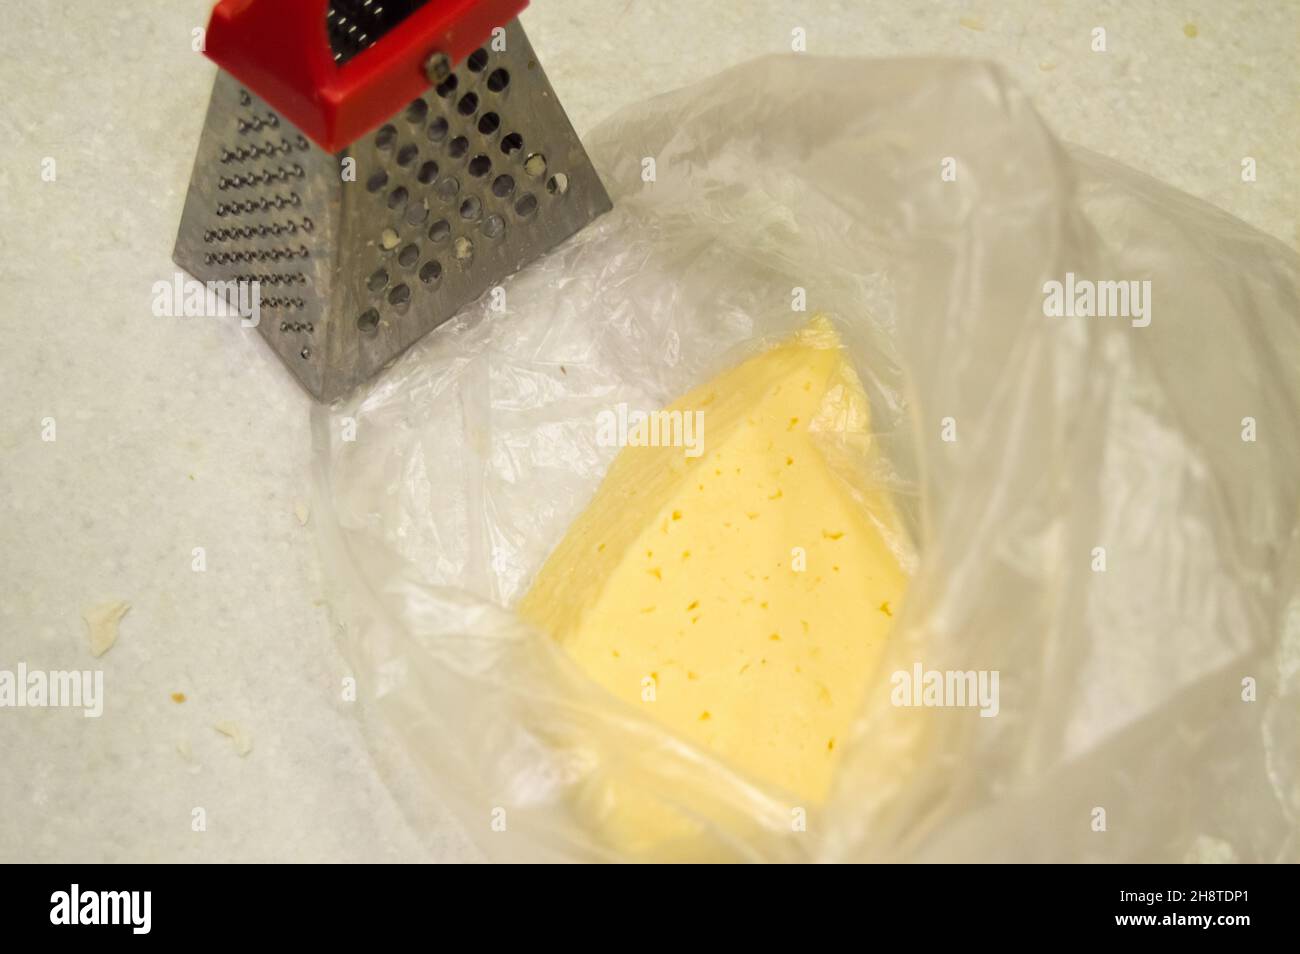 https://c8.alamy.com/comp/2H8TDP1/a-piece-of-cheese-in-a-plastic-bag-next-to-a-small-metal-grater-non-ecological-packaging-2H8TDP1.jpg